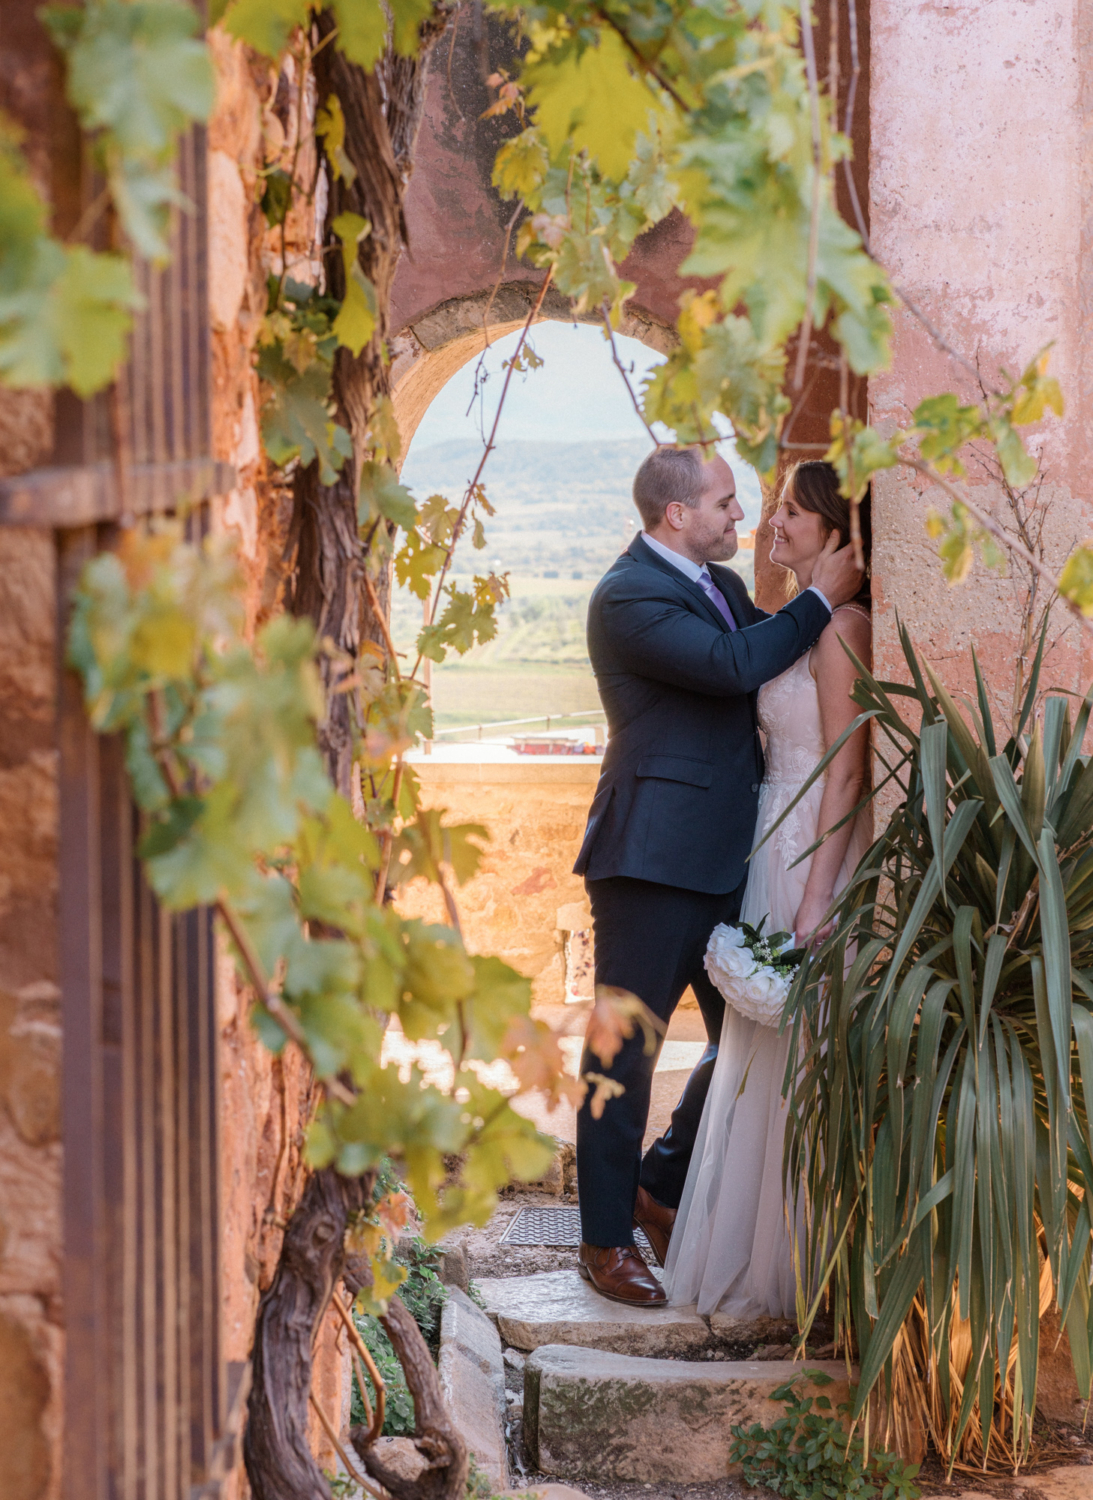 newlyweds embrace in roussillon france